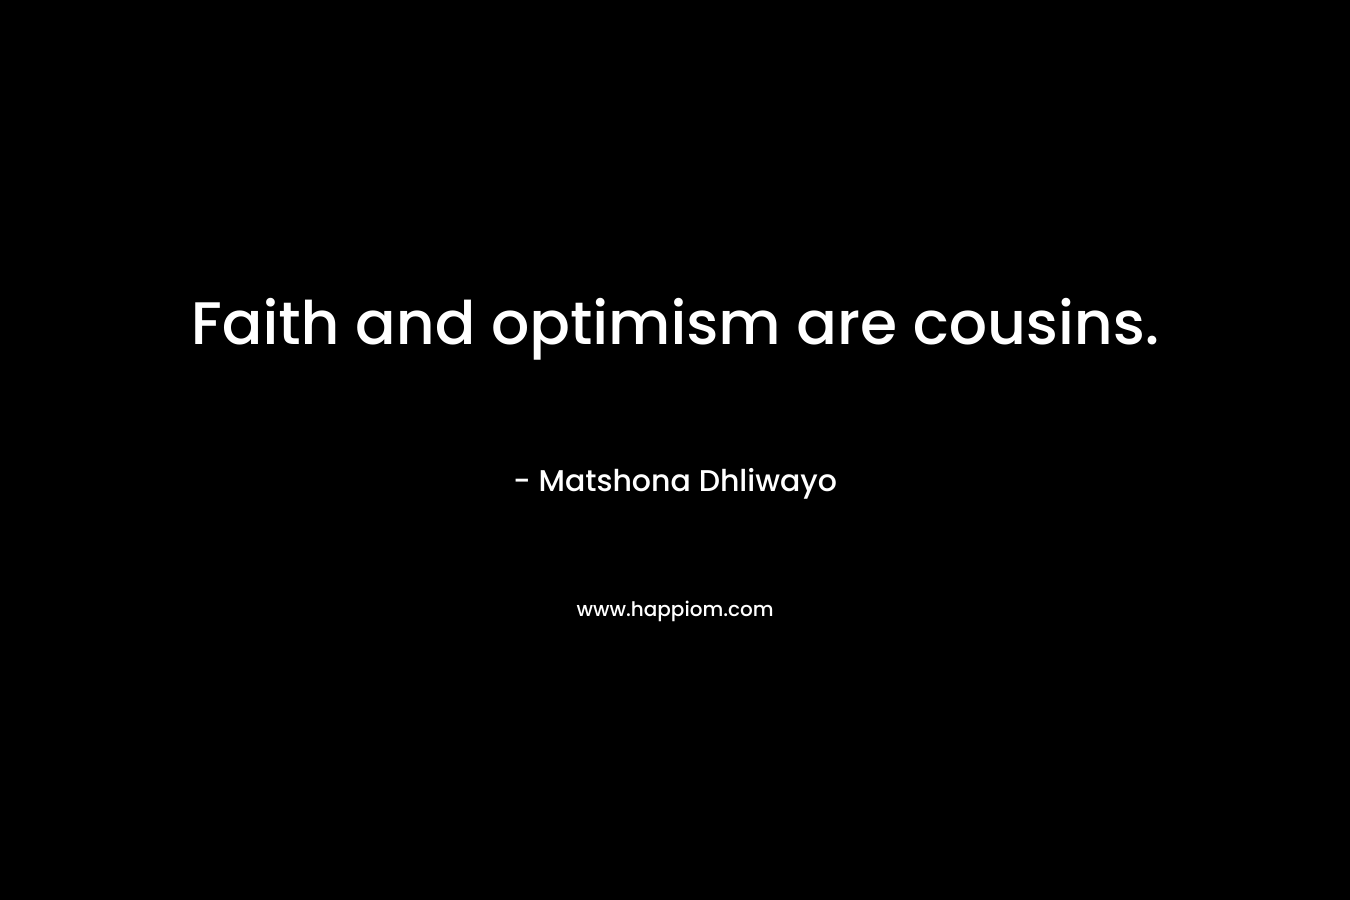 Faith and optimism are cousins.